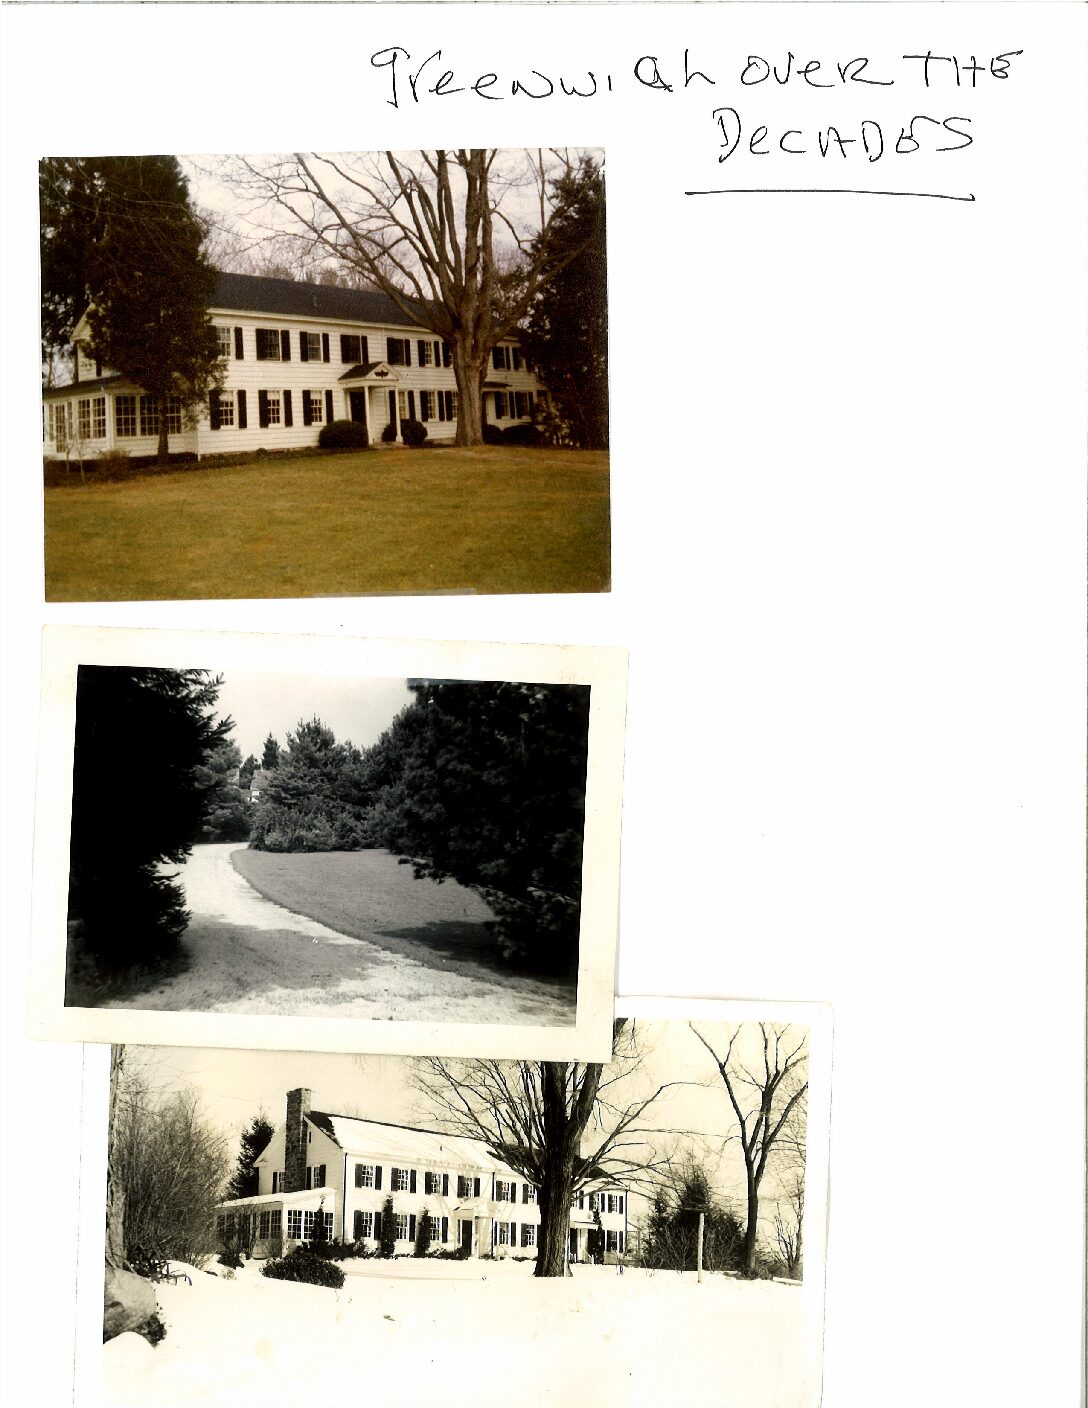 Greenwich House Over the Decades